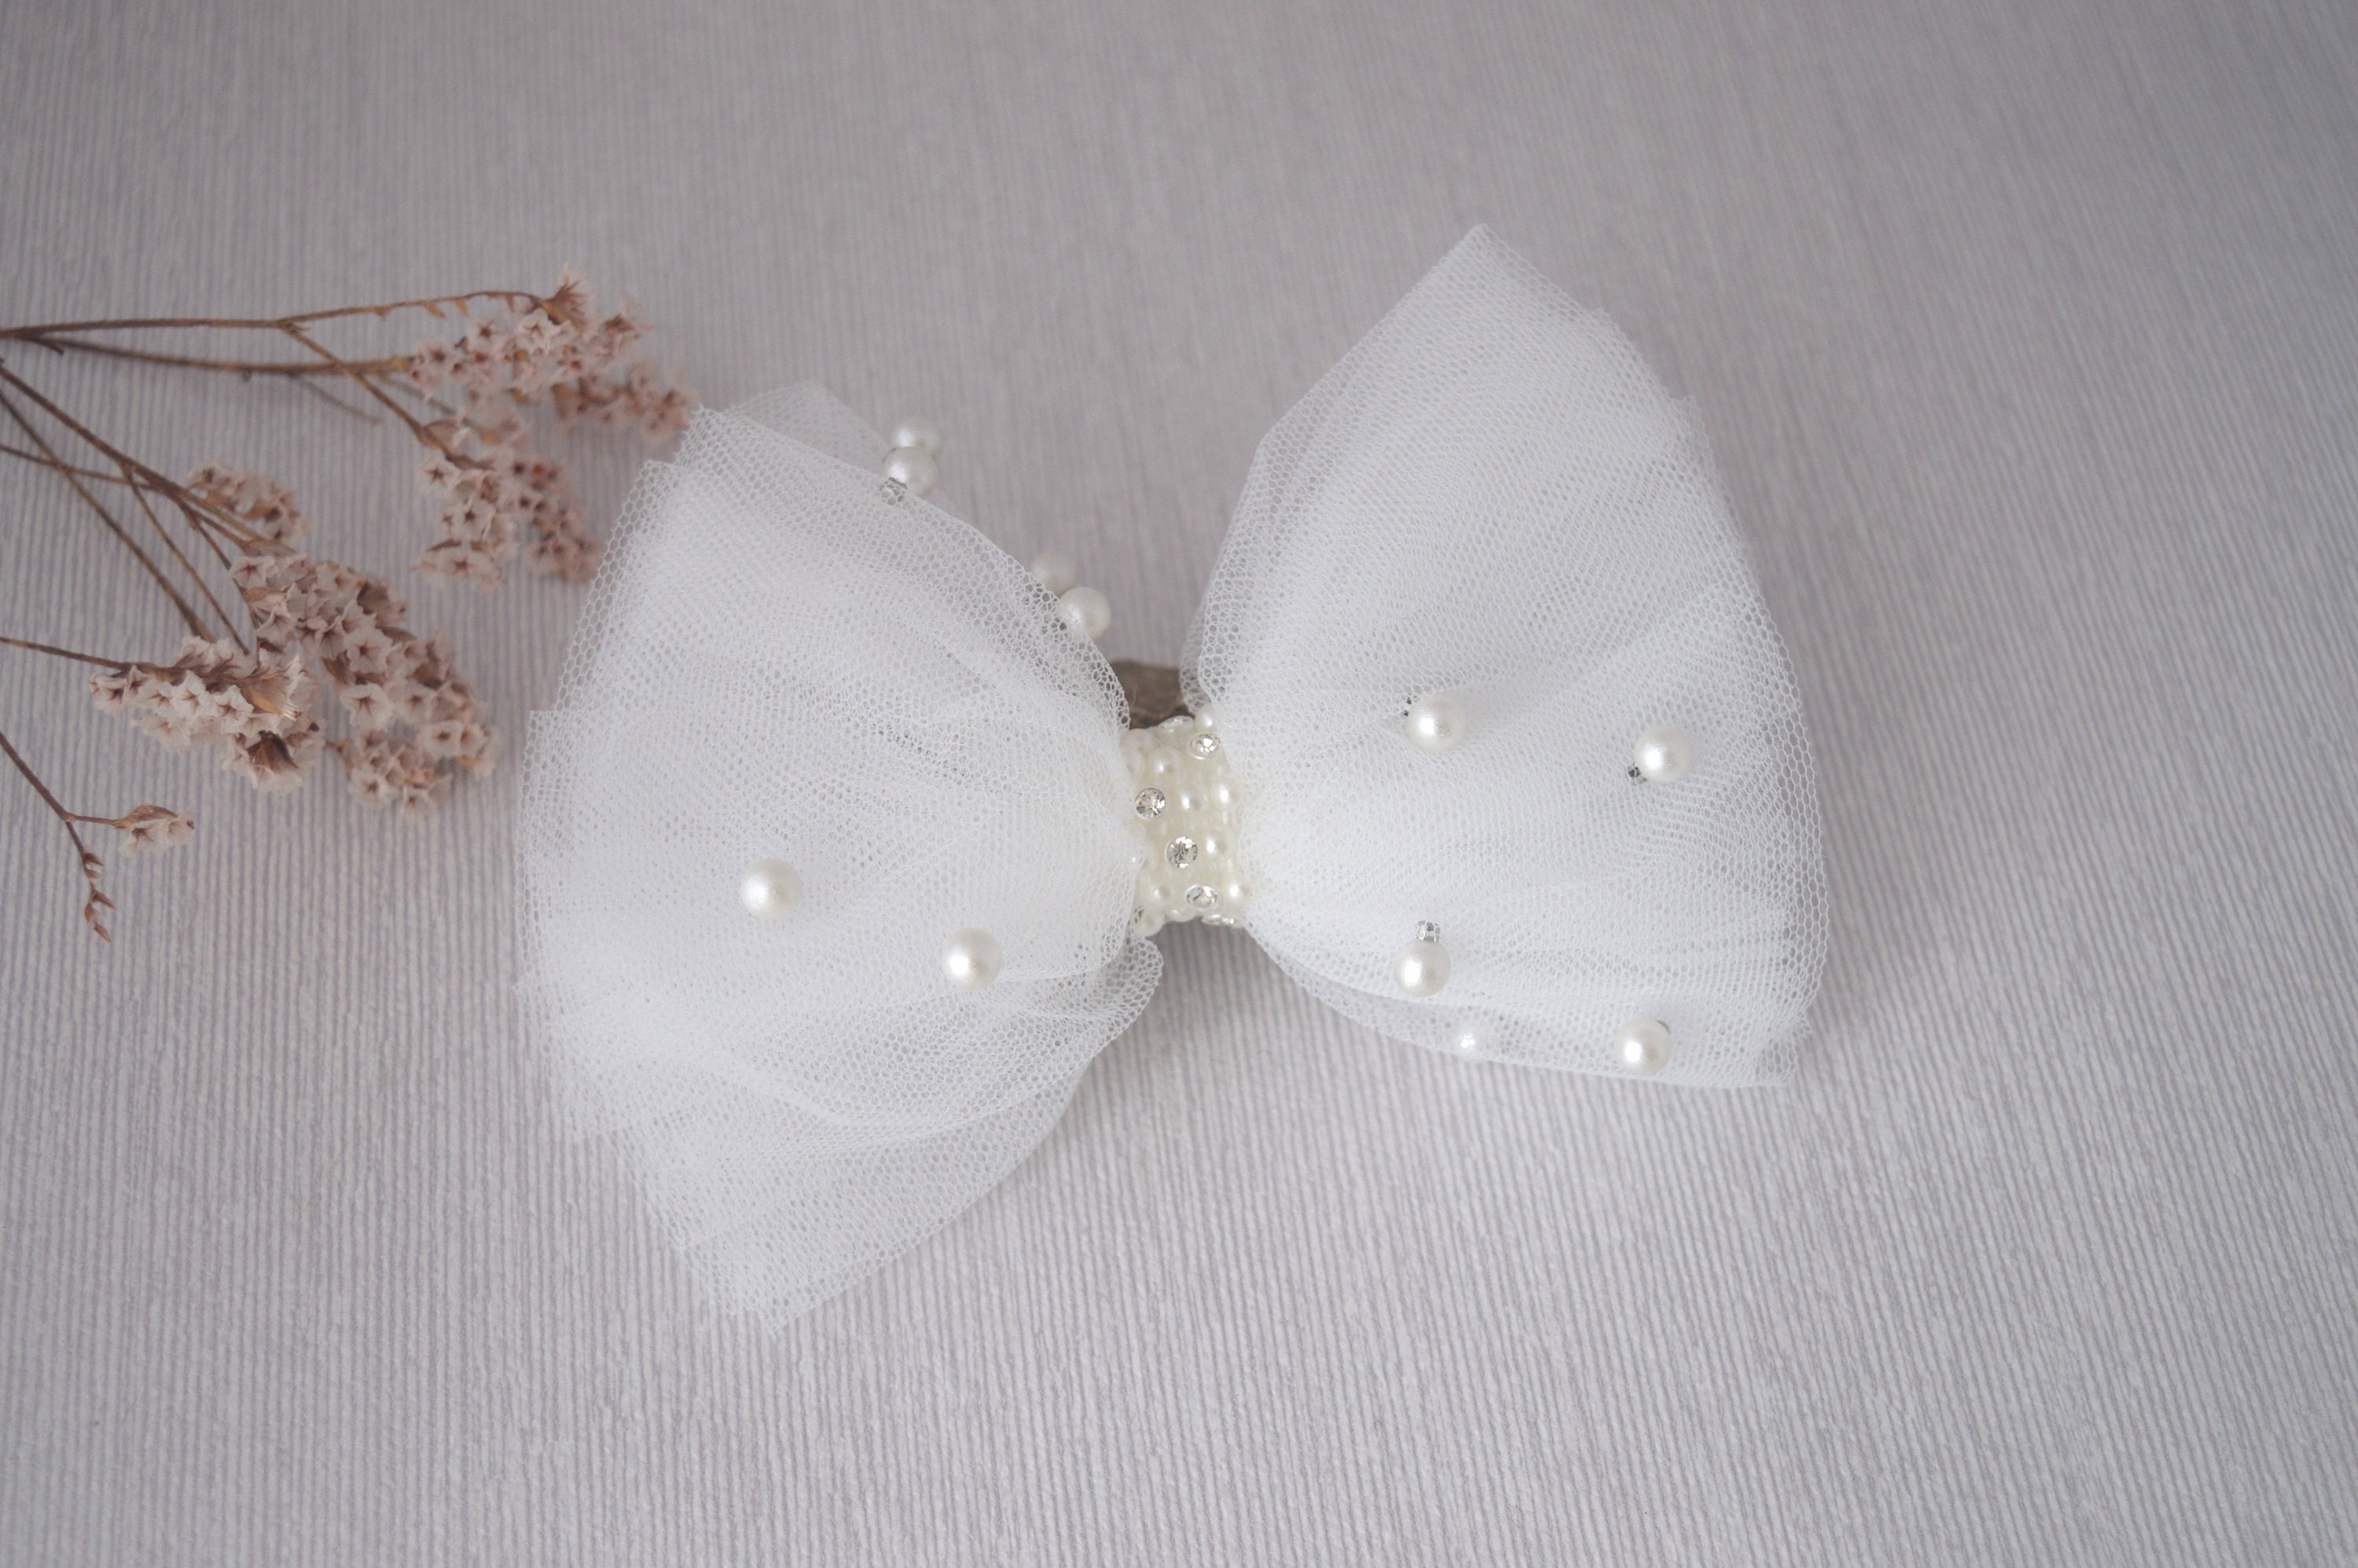 1pc Big Tulle Pew Bows,big Pew Bows, Tulle Bows, Formal Wedding Decor,  Wedding Decor About 16 Inches Wide, 30 Inches Long 